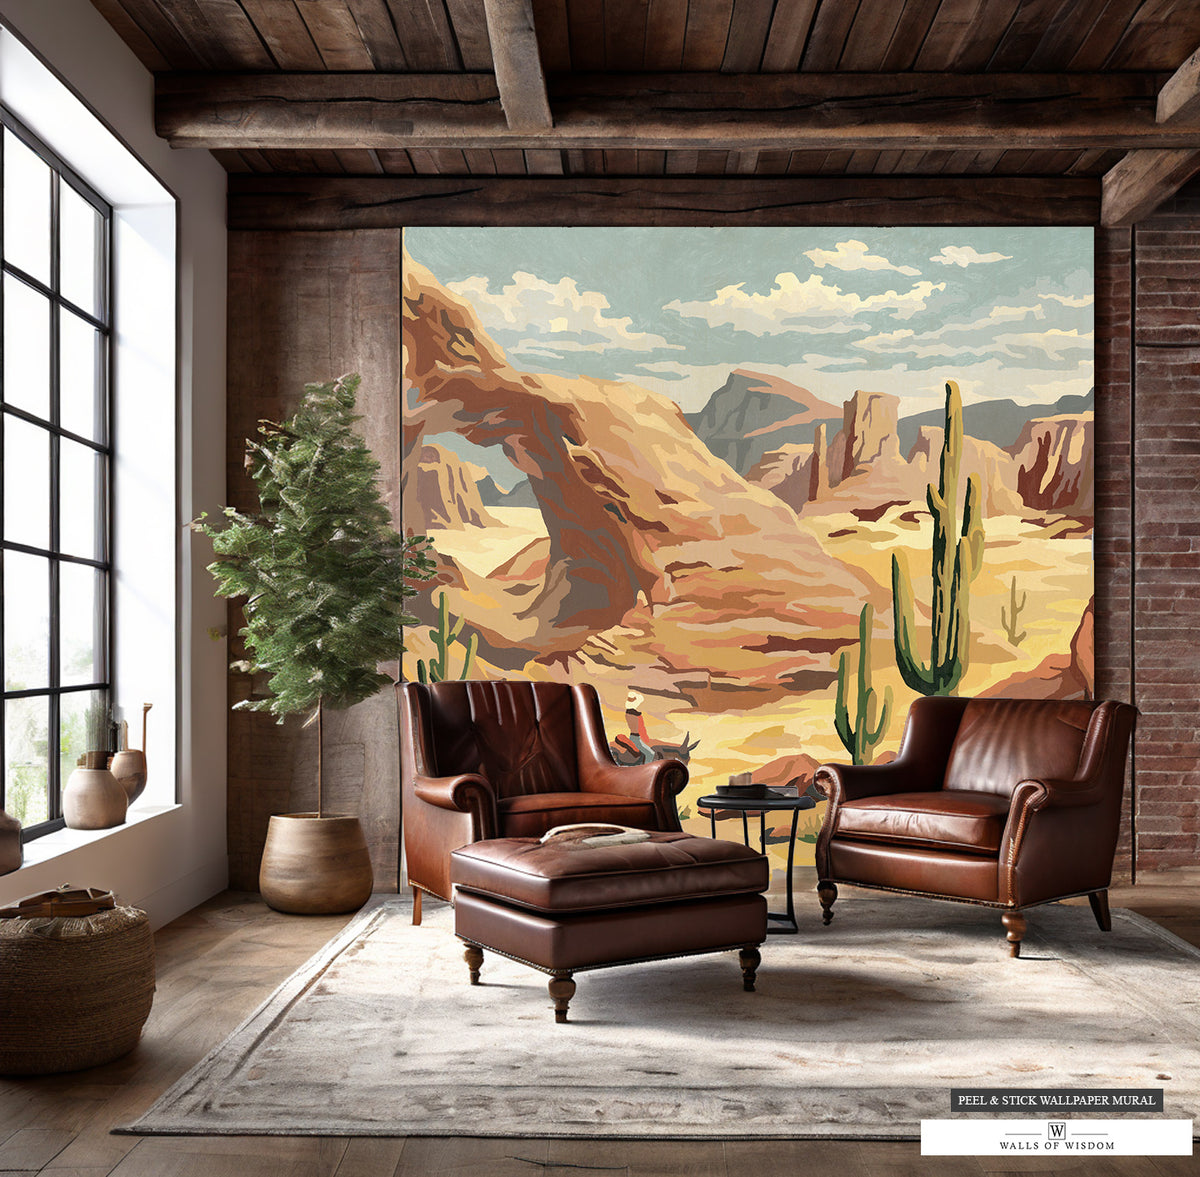 Large Wall Art of Arizona Desert Landscape, Ideal for Accent Walls.